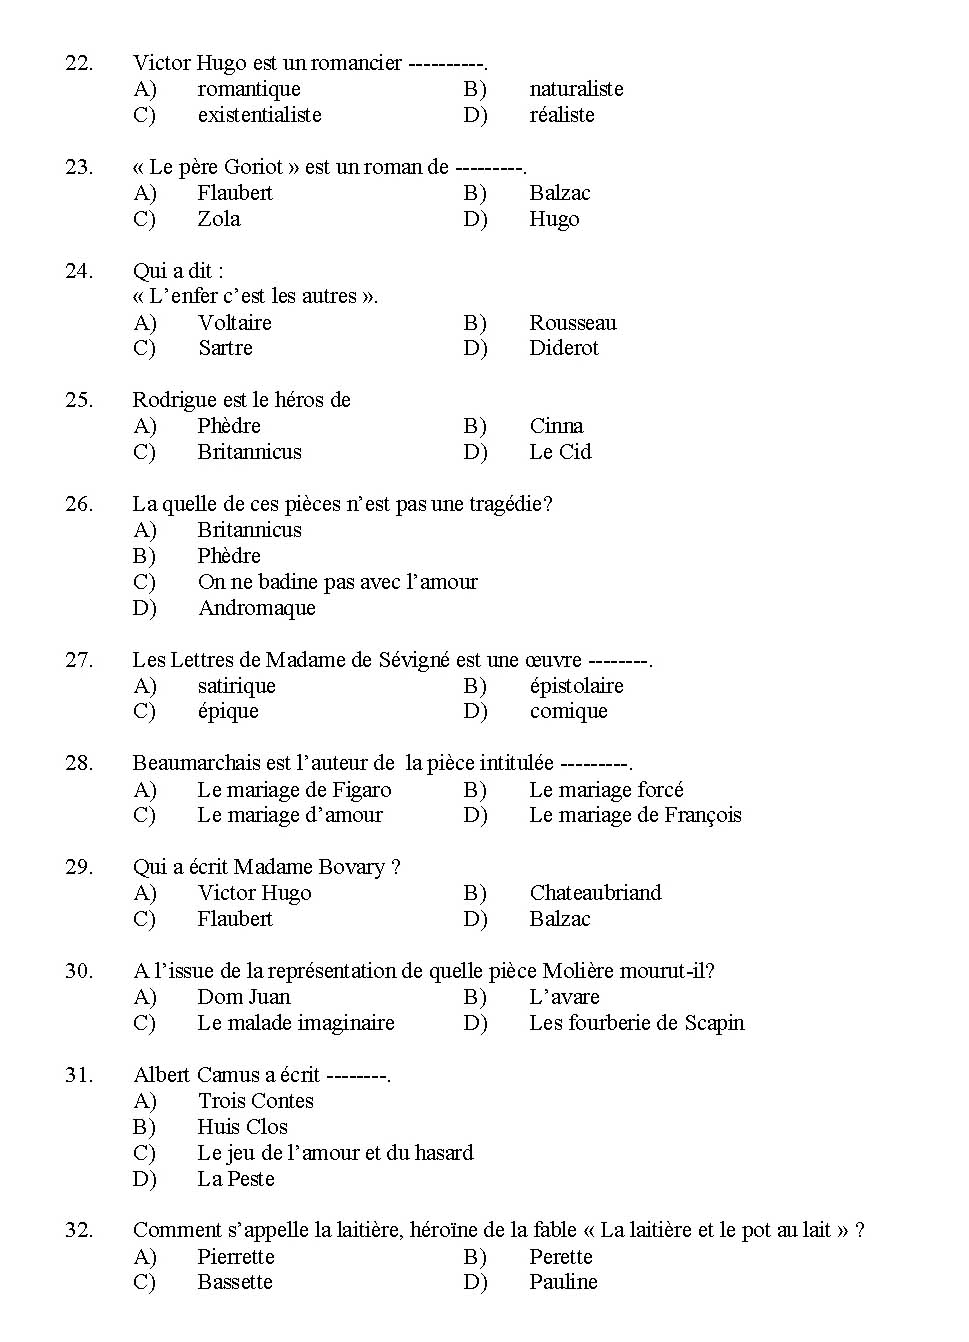 Kerala SET French Exam 2016 Question Code 16108 A 3